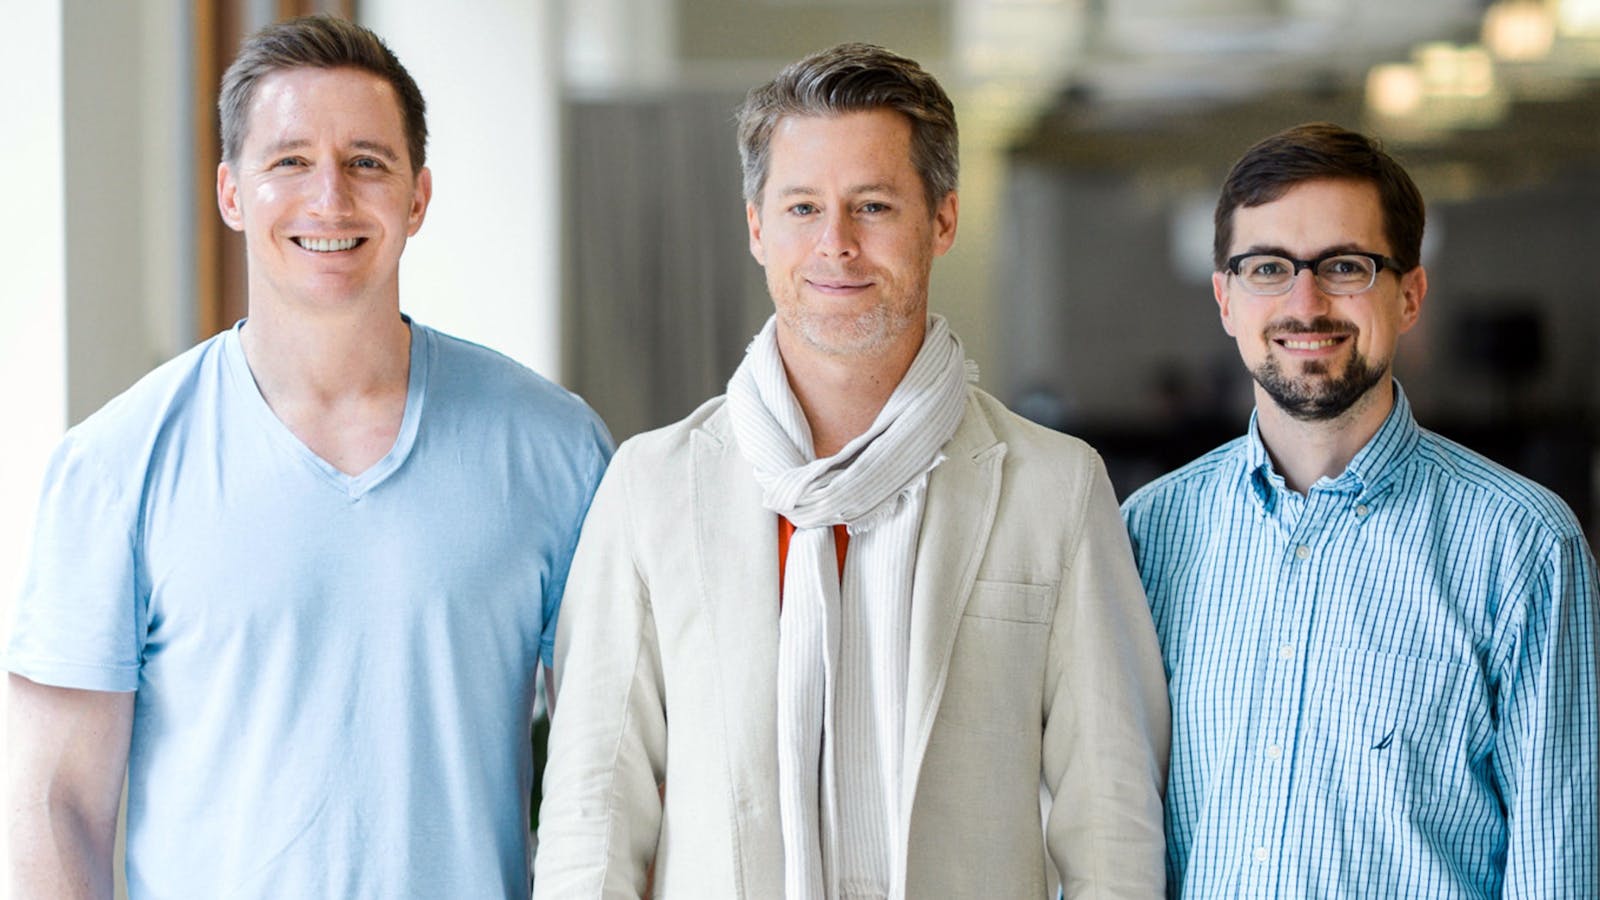 Cockroach Labs co-founders (from left): Peter Mattis, Spencer Kimball, and Ben Darnell. Photo by Cockroach Labs.